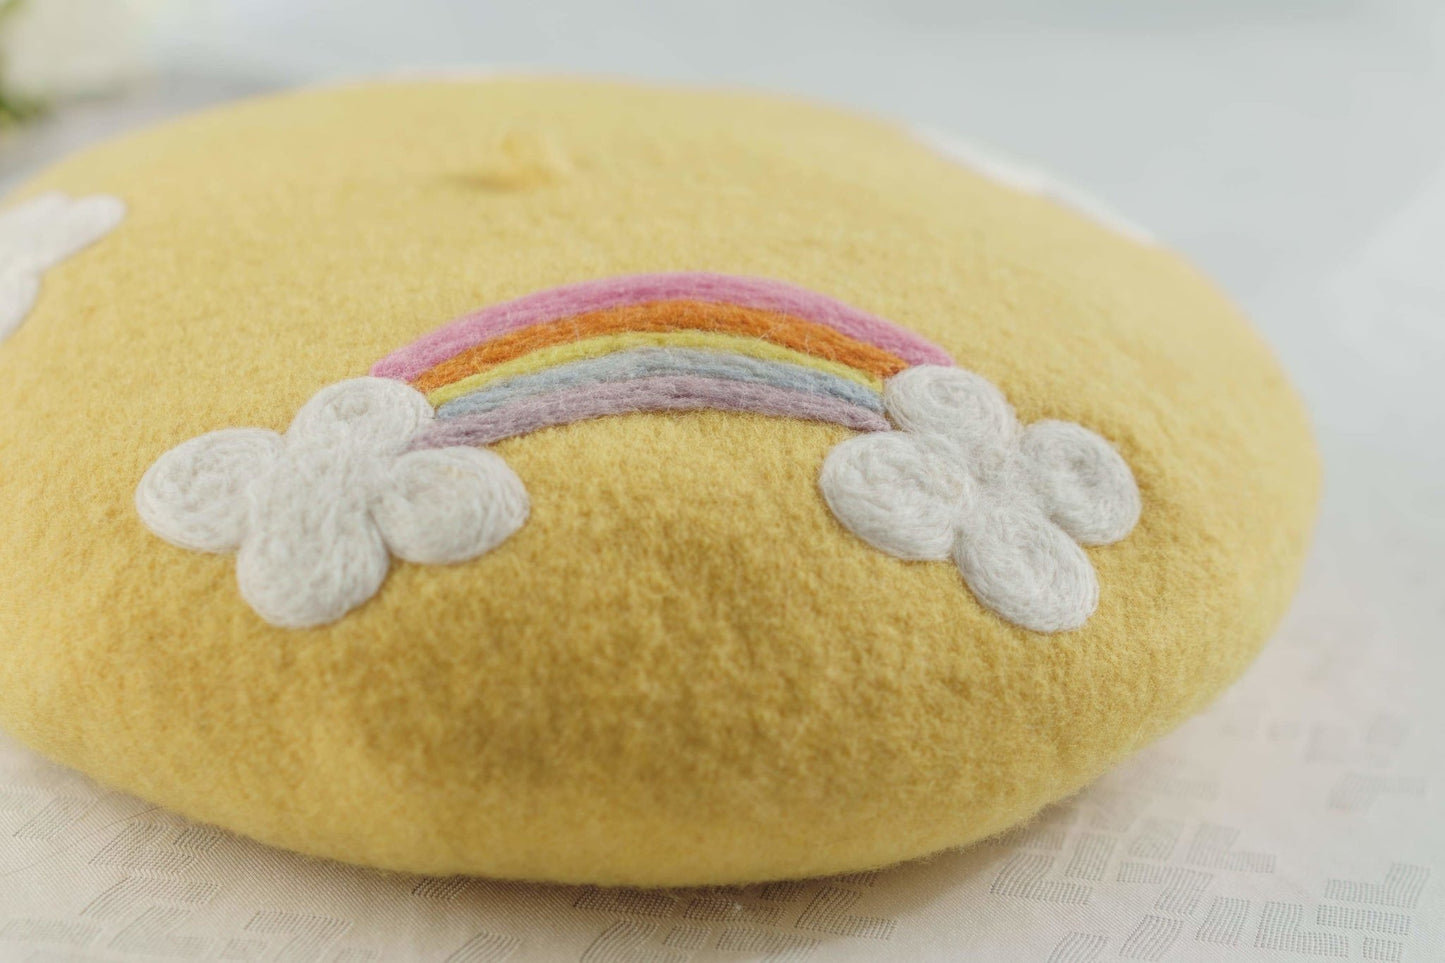 Rainbow beret for women and girls.